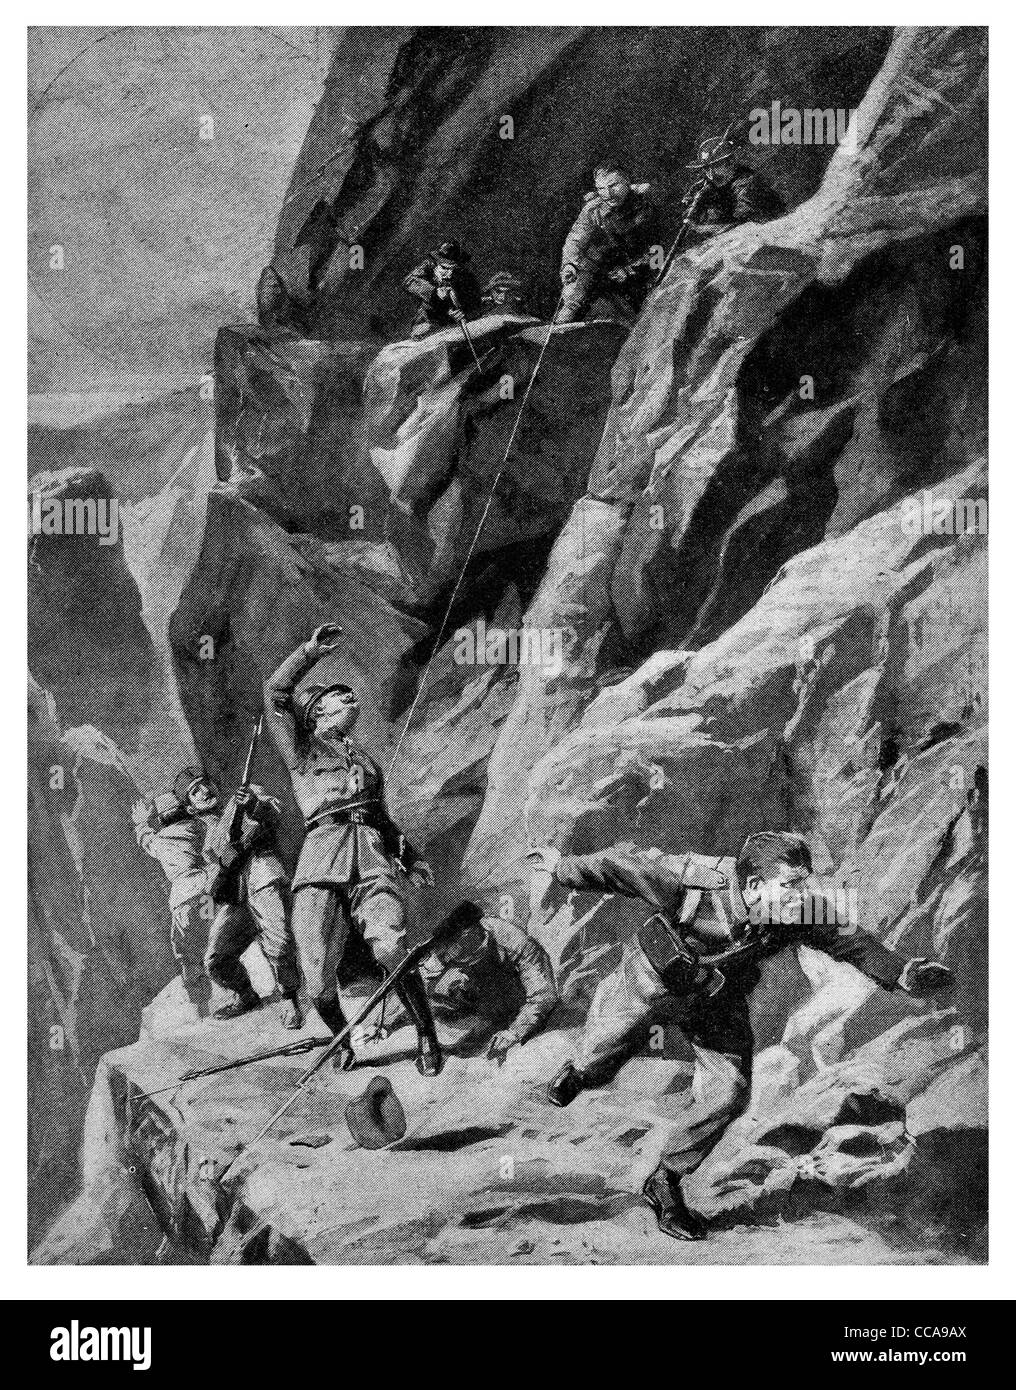 1915 Sicilian soldier lassoing lasso lassoed Austrian general  Isonzo heights Italy awarded gold medal cliff mountain warfare Stock Photo